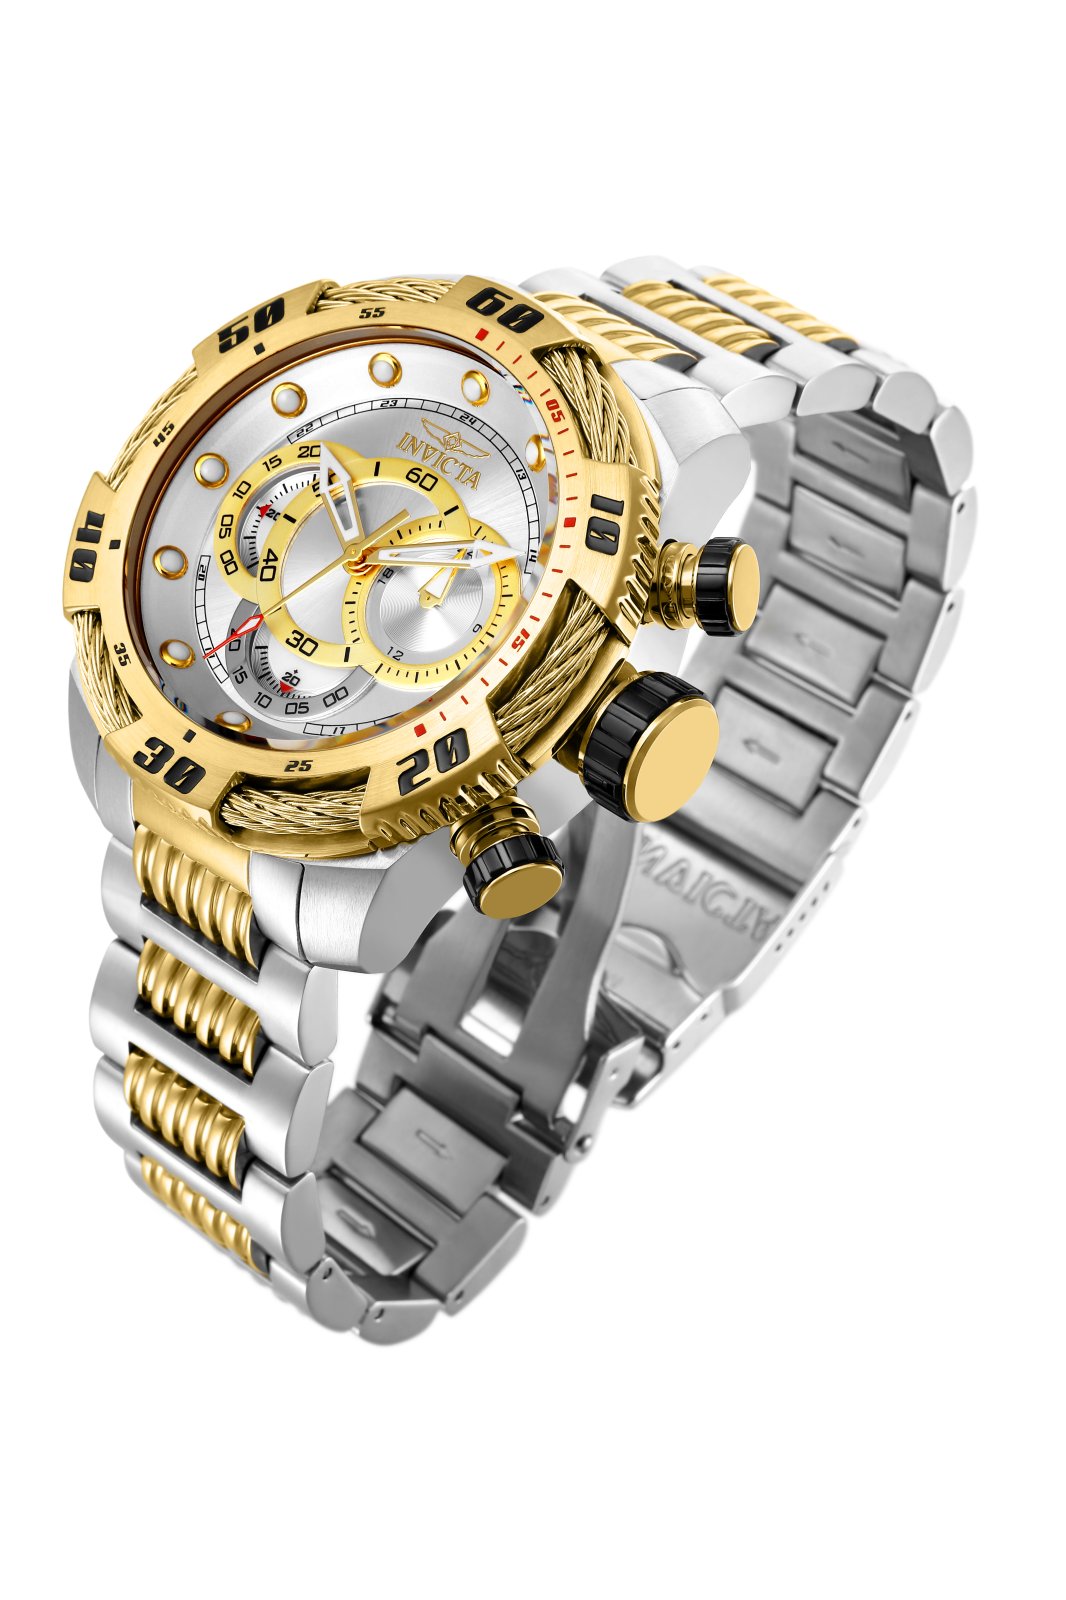 Invicta Watch Speedway 25480 Official Invicta Store Buy Online!